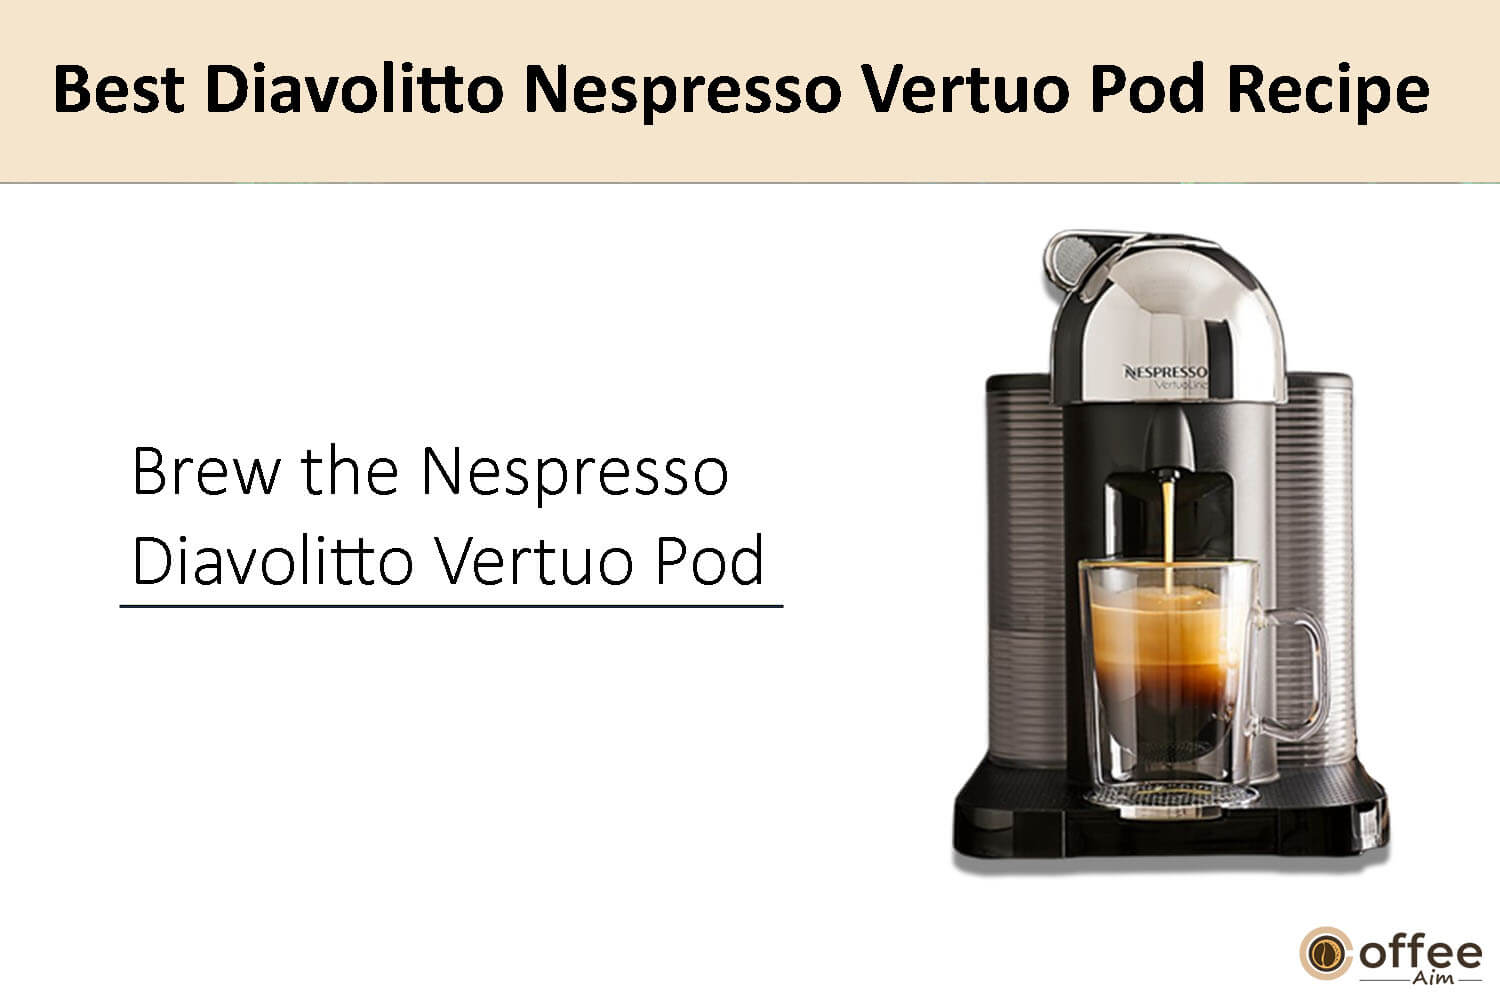 In this image, I clarify the preparation instructions for crafting the finest Diavolitto Nespresso Vertuo coffee pod.